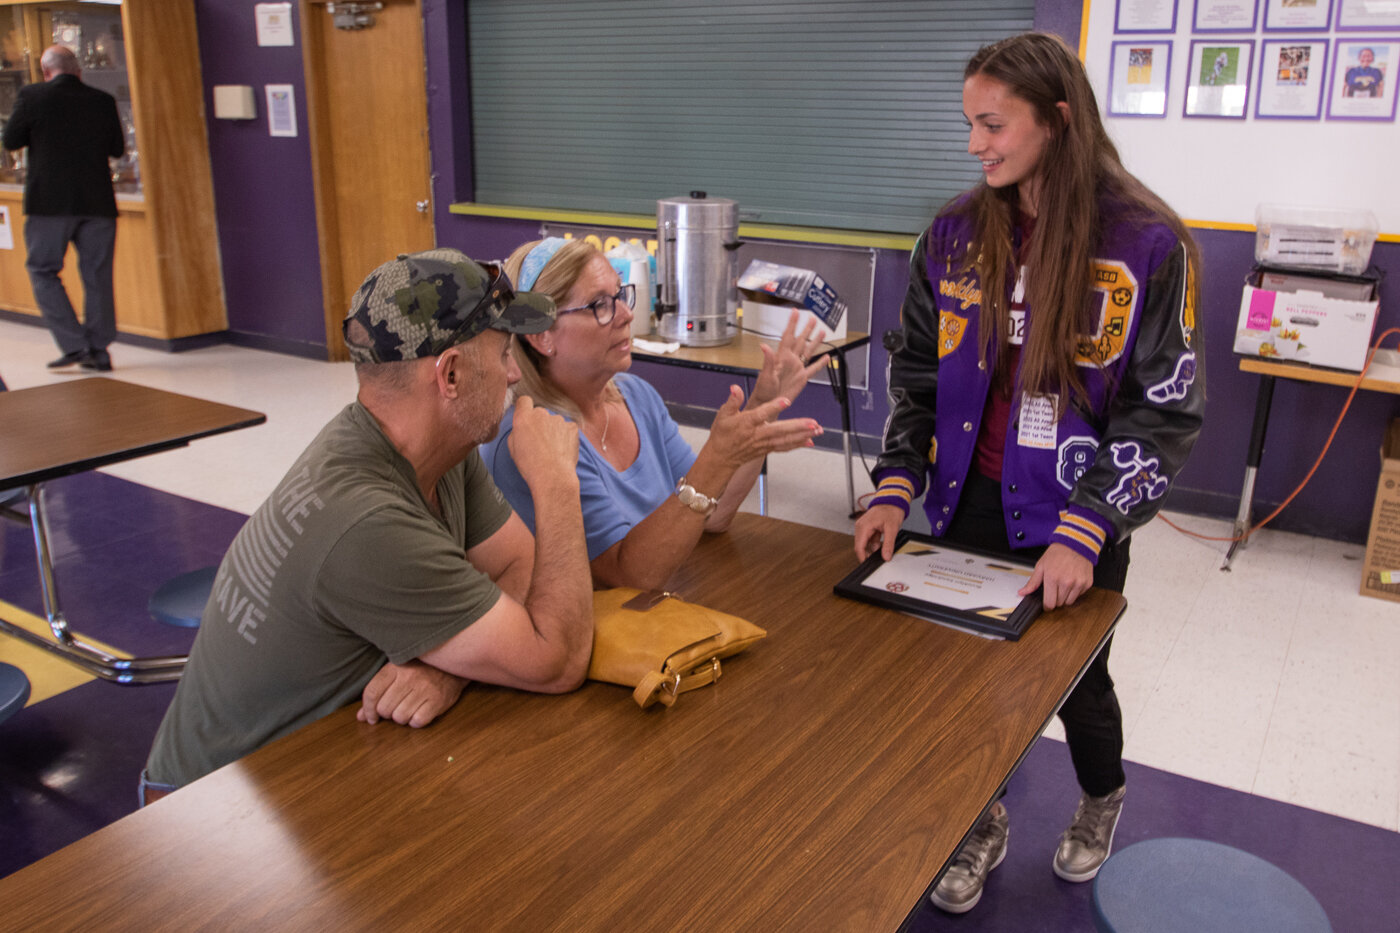 Following her congratulatory ceremony, Brooklyn Sandridge talks with friends Thursday afternoon as she is now preparing to move to Massachusetts to attend Harvard.